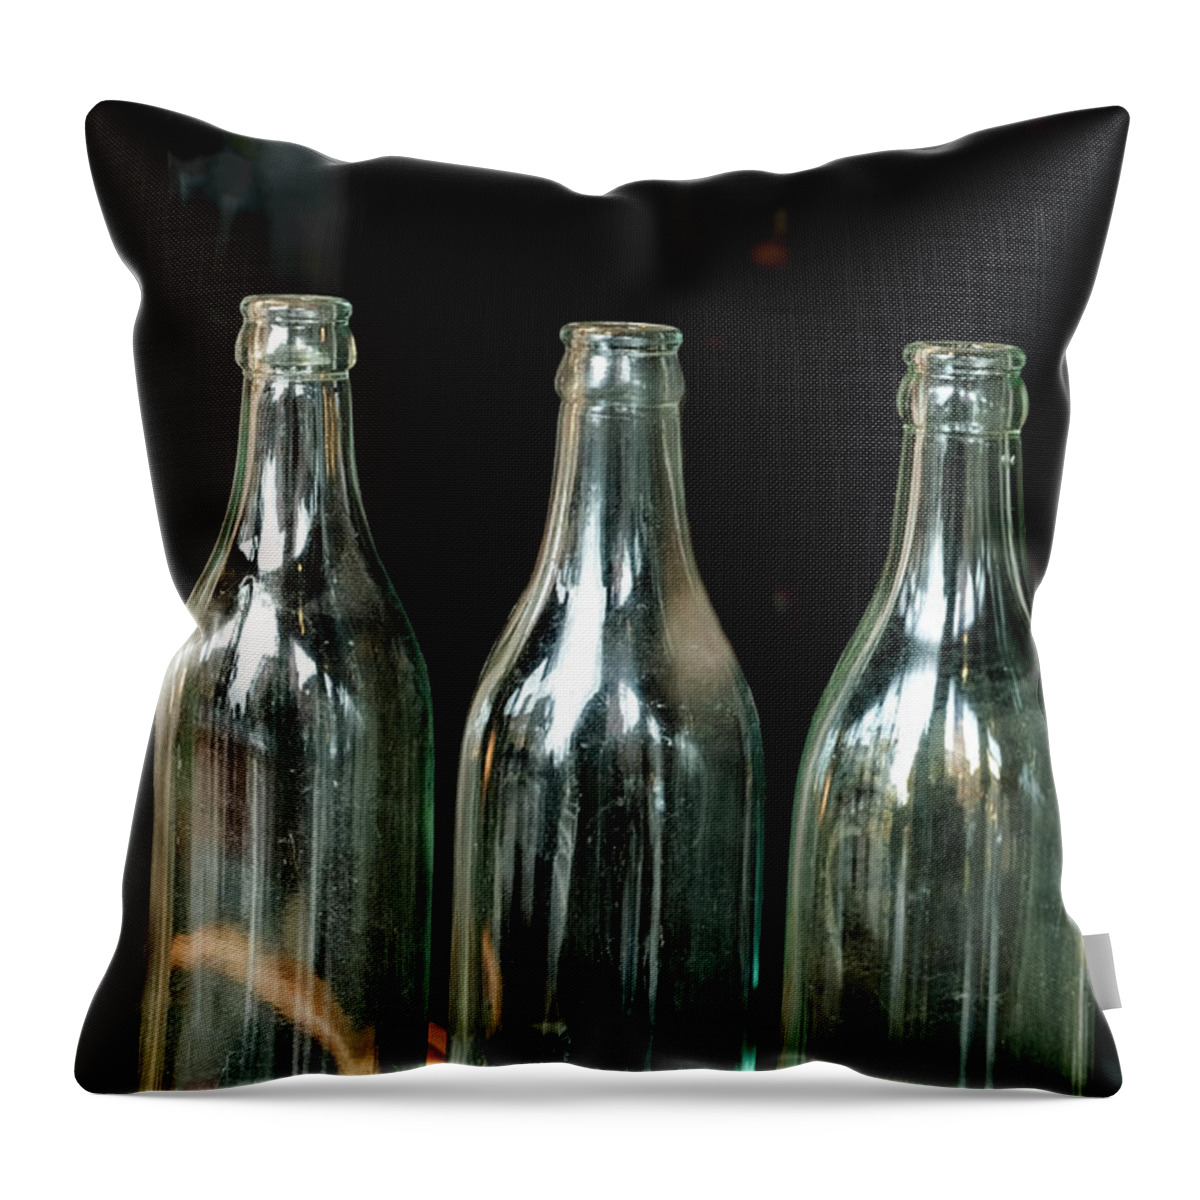 Whetstone Brook Throw Pillow featuring the photograph Three Bottles by Tom Singleton